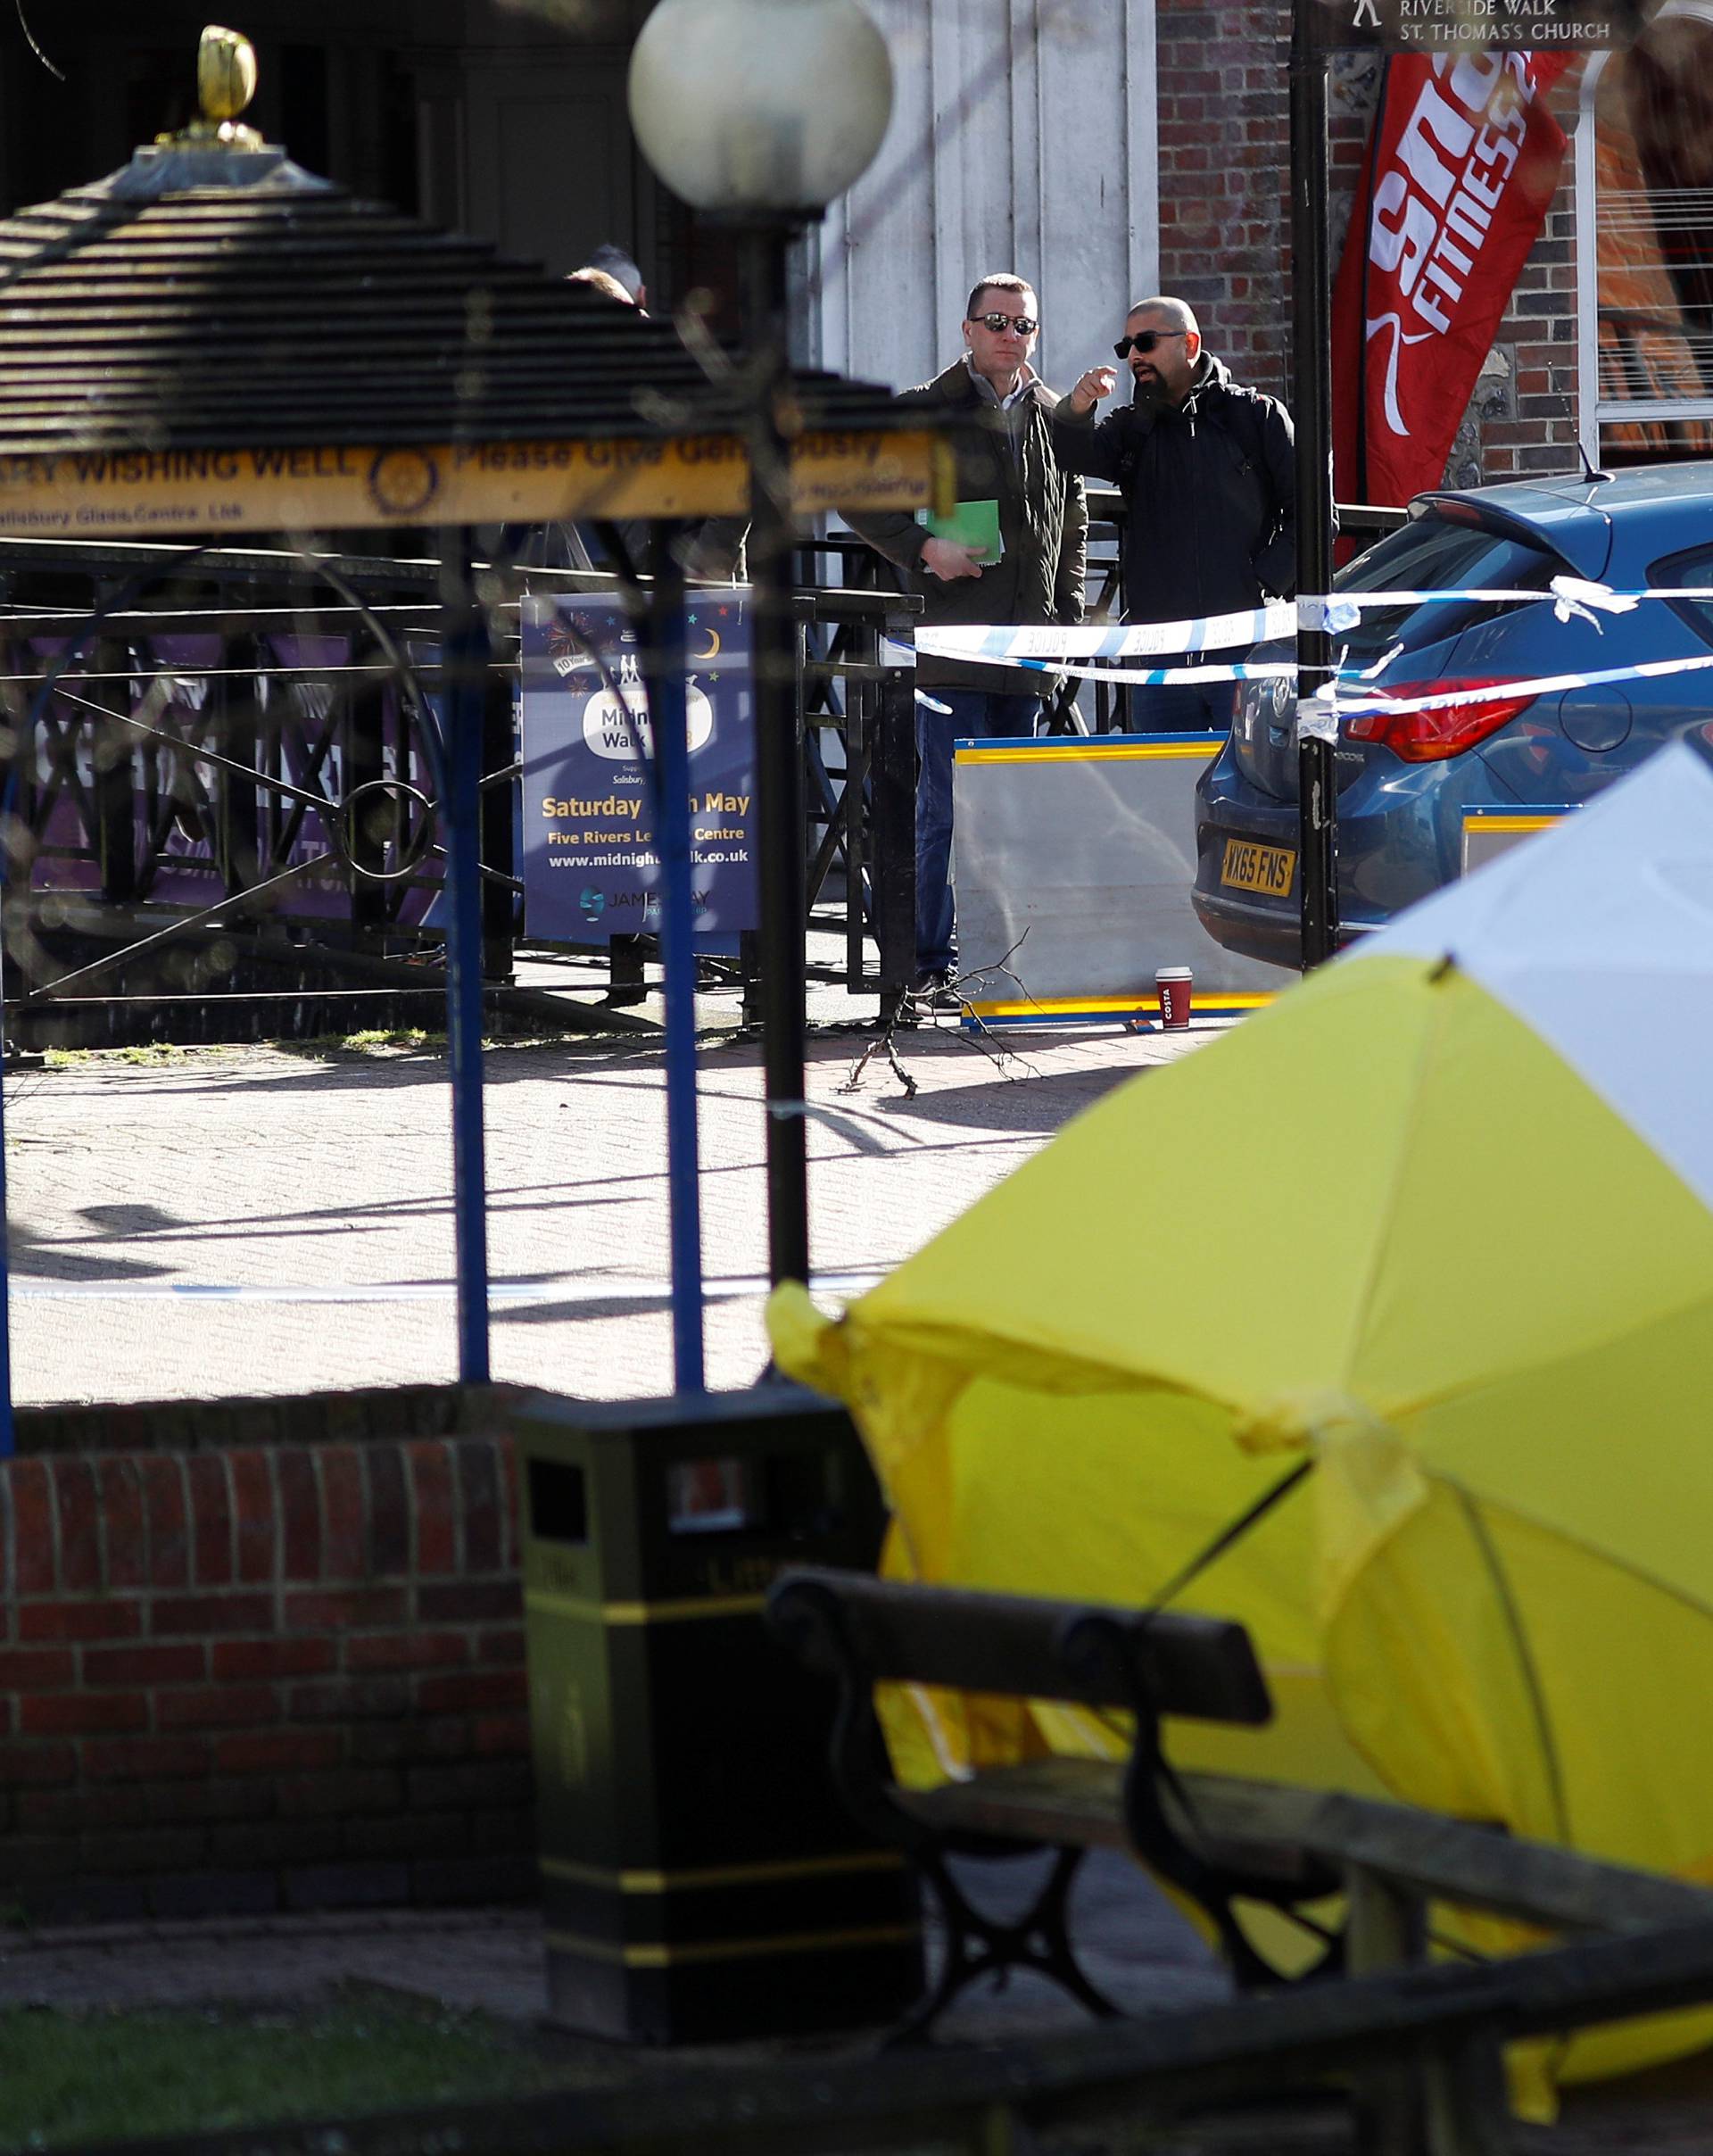 Local officials survey the scene as the forensic tent, covering the bench where Sergei Skripal and his daughter Yulia were found, is blown out of position in the centre of Salisbury